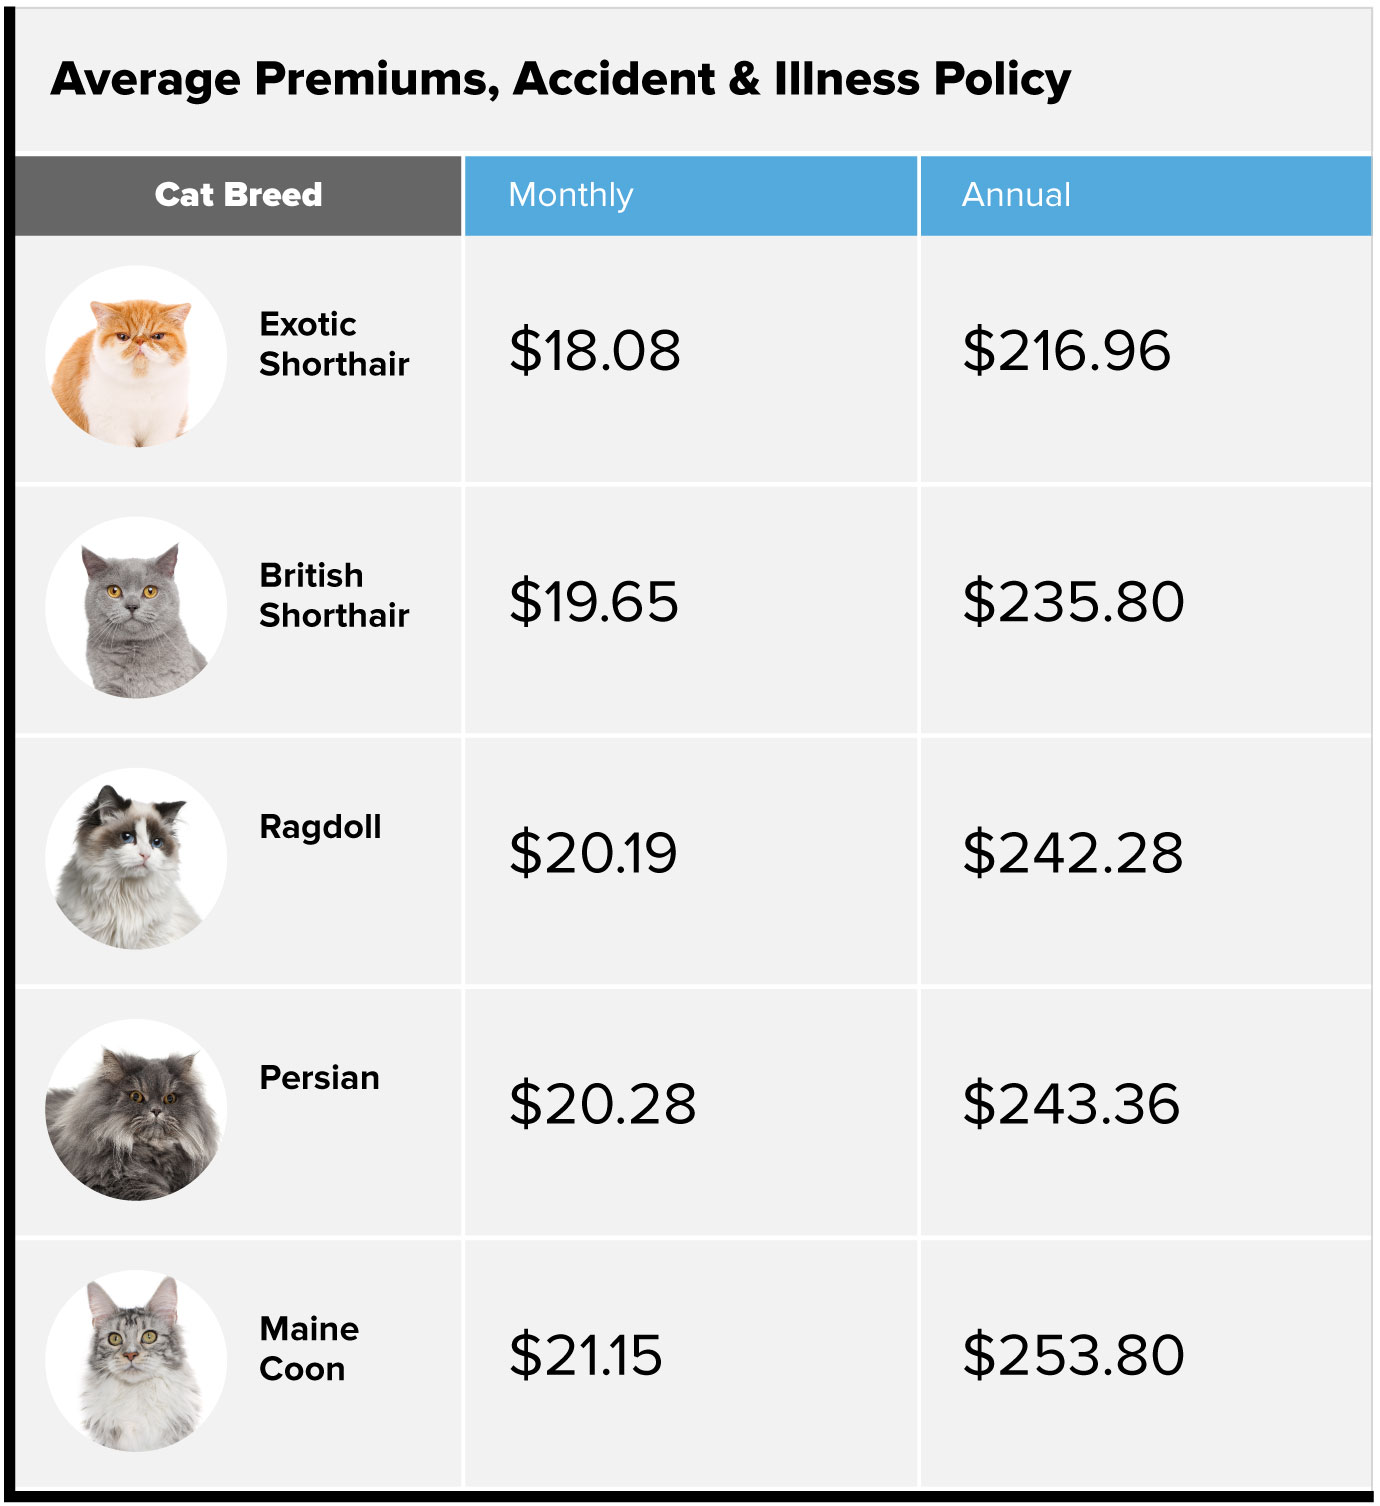 Average premiums, accident and illness policy for cats chart. Exotic shorthair $18.08 monthly, $216.96 annually. British shorthair $19.65 monthly, $235.80 annually. Ragdoll $20.19 monthly, $242.28 annually. Persian $20.28 monthly, $243.36 annually. Maine coon $21.15 monthly, $253.80 annually.